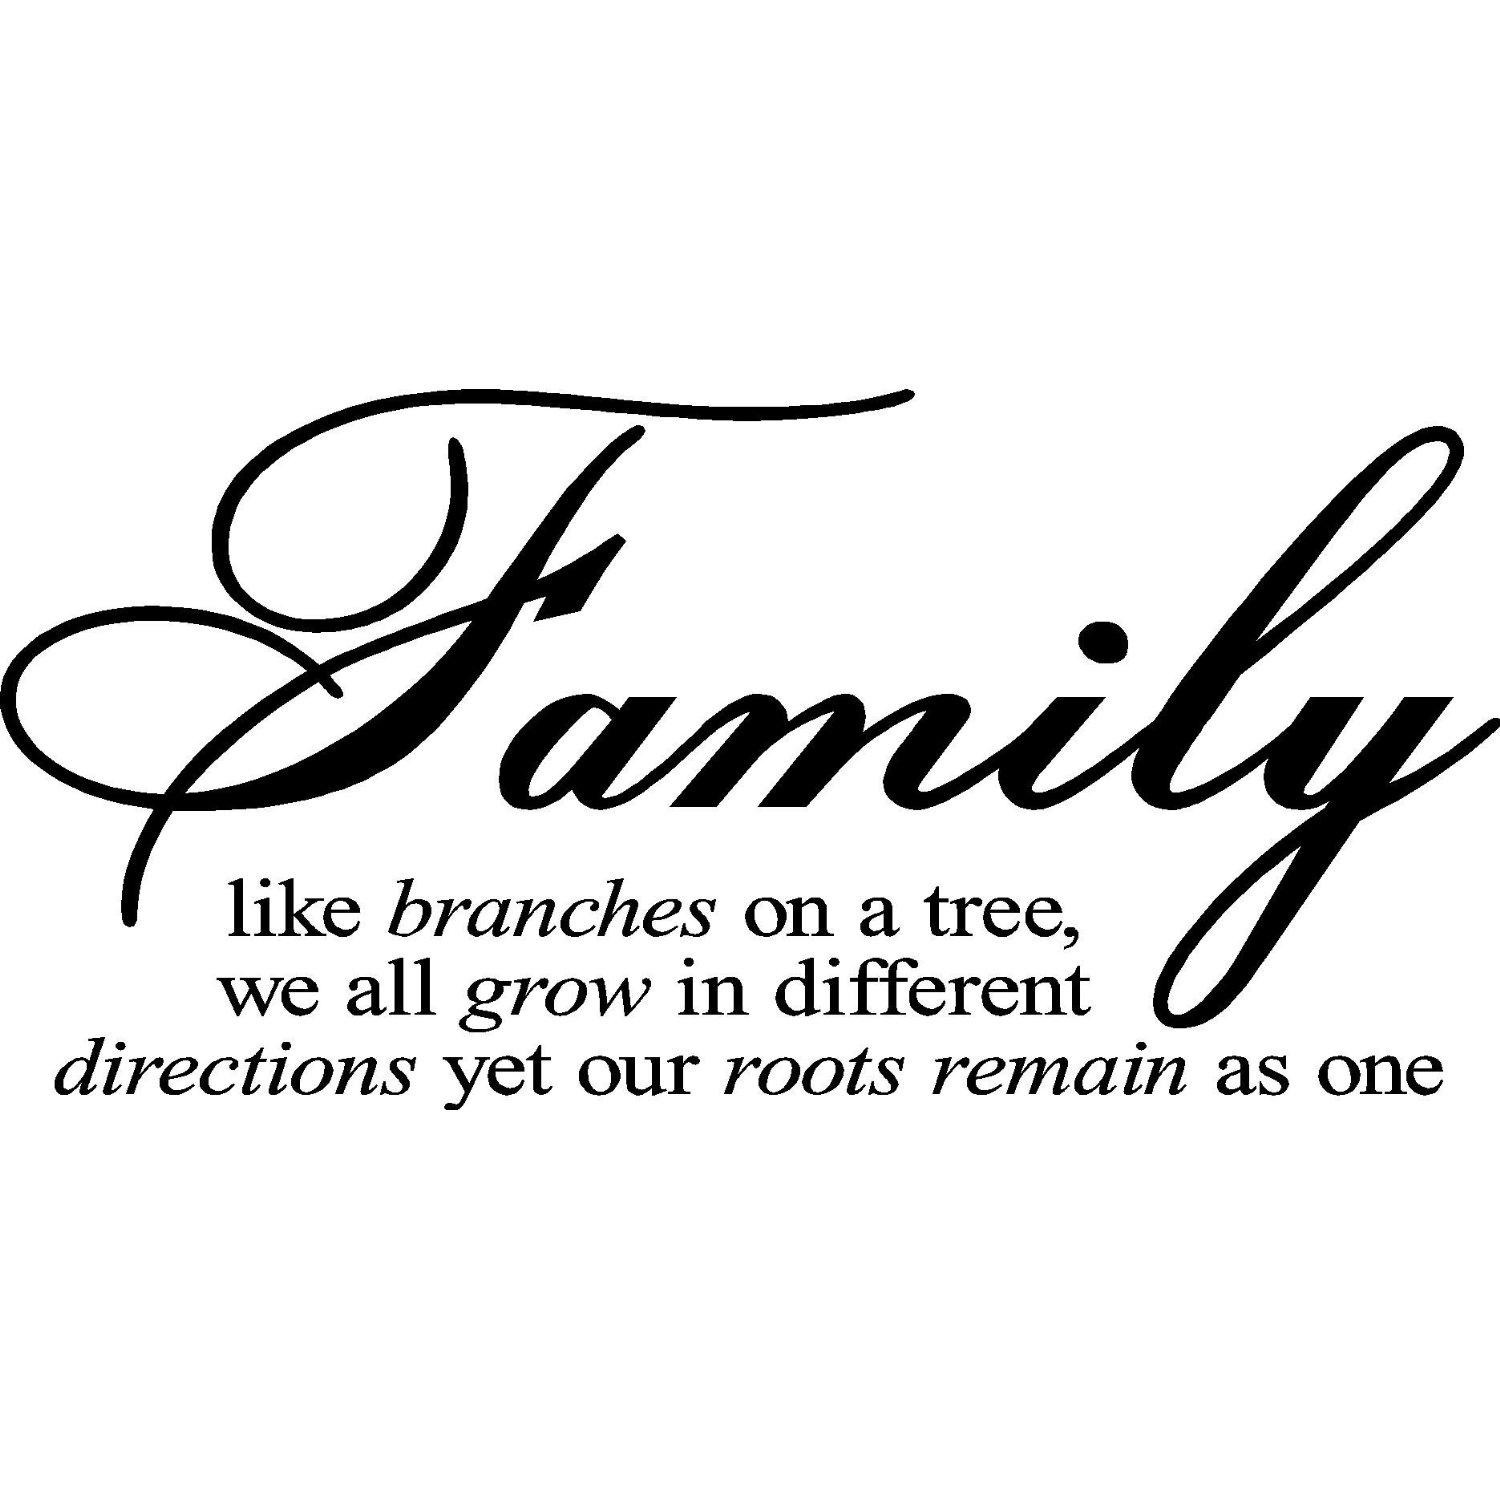 Non Blood Family Quotes
 Non Blood Related Family Quotes QuotesGram